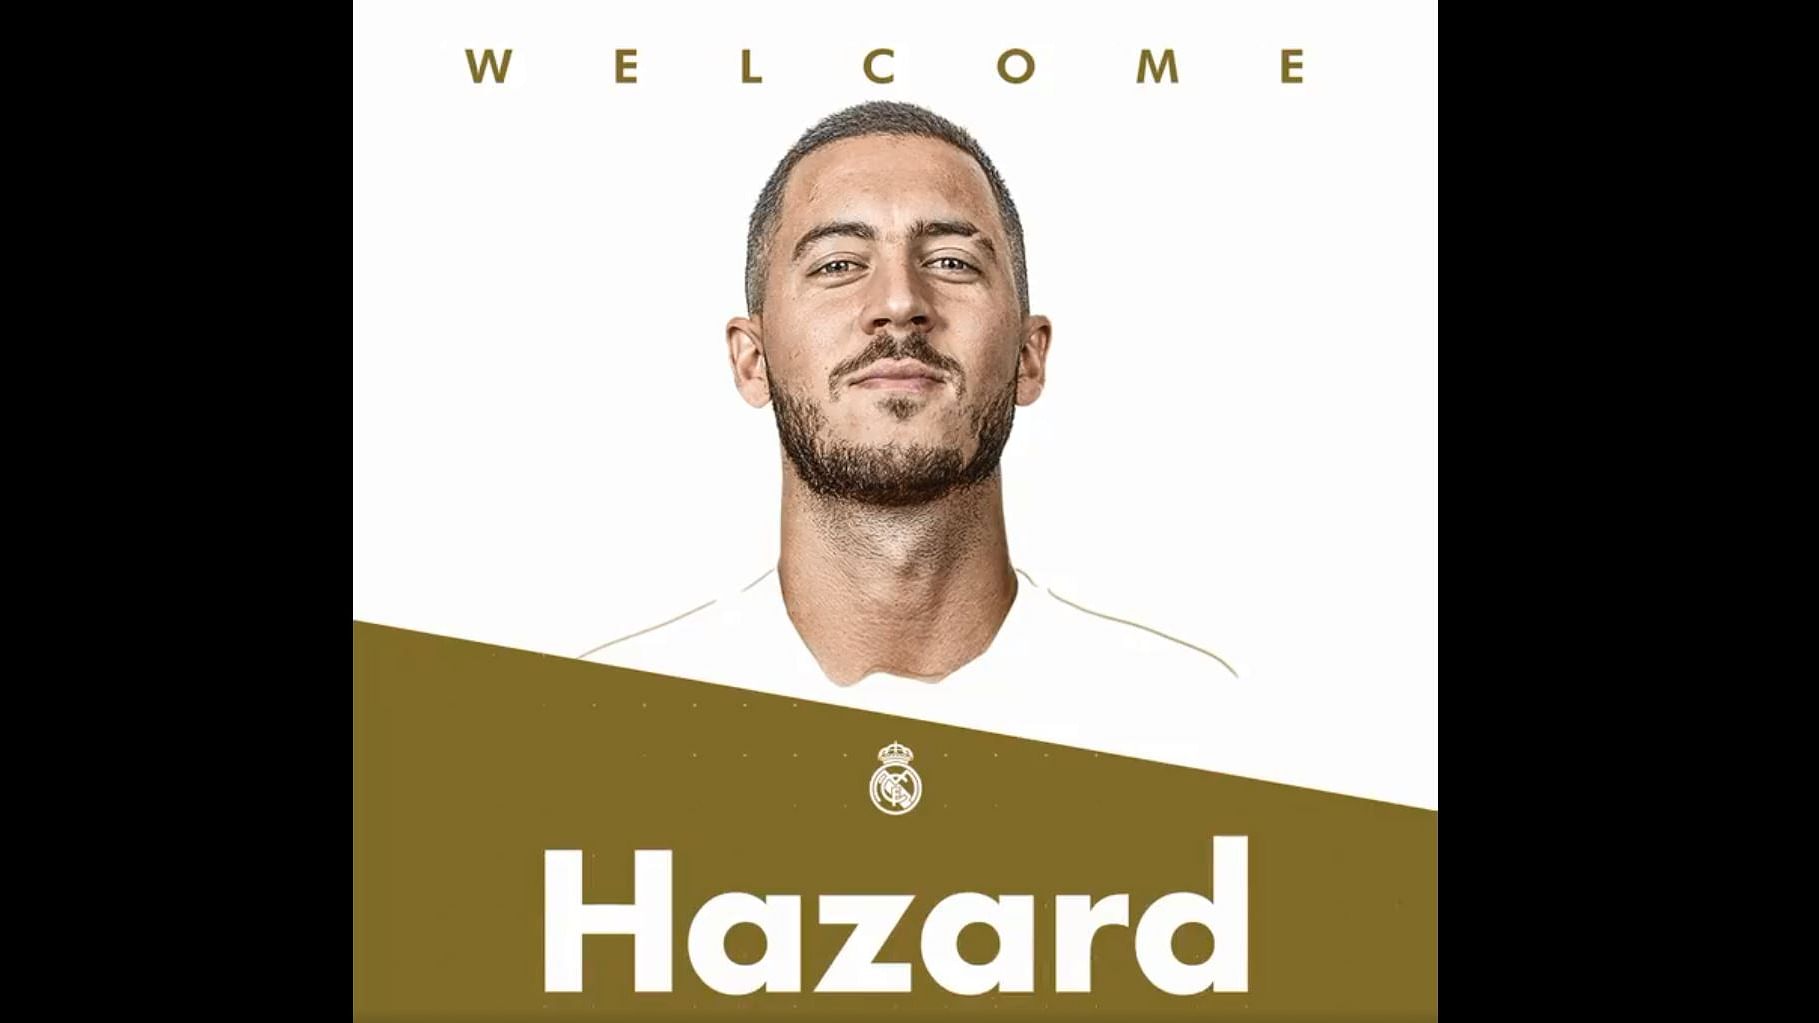 Real Madrid announced Eden Hazard as their latest signing.